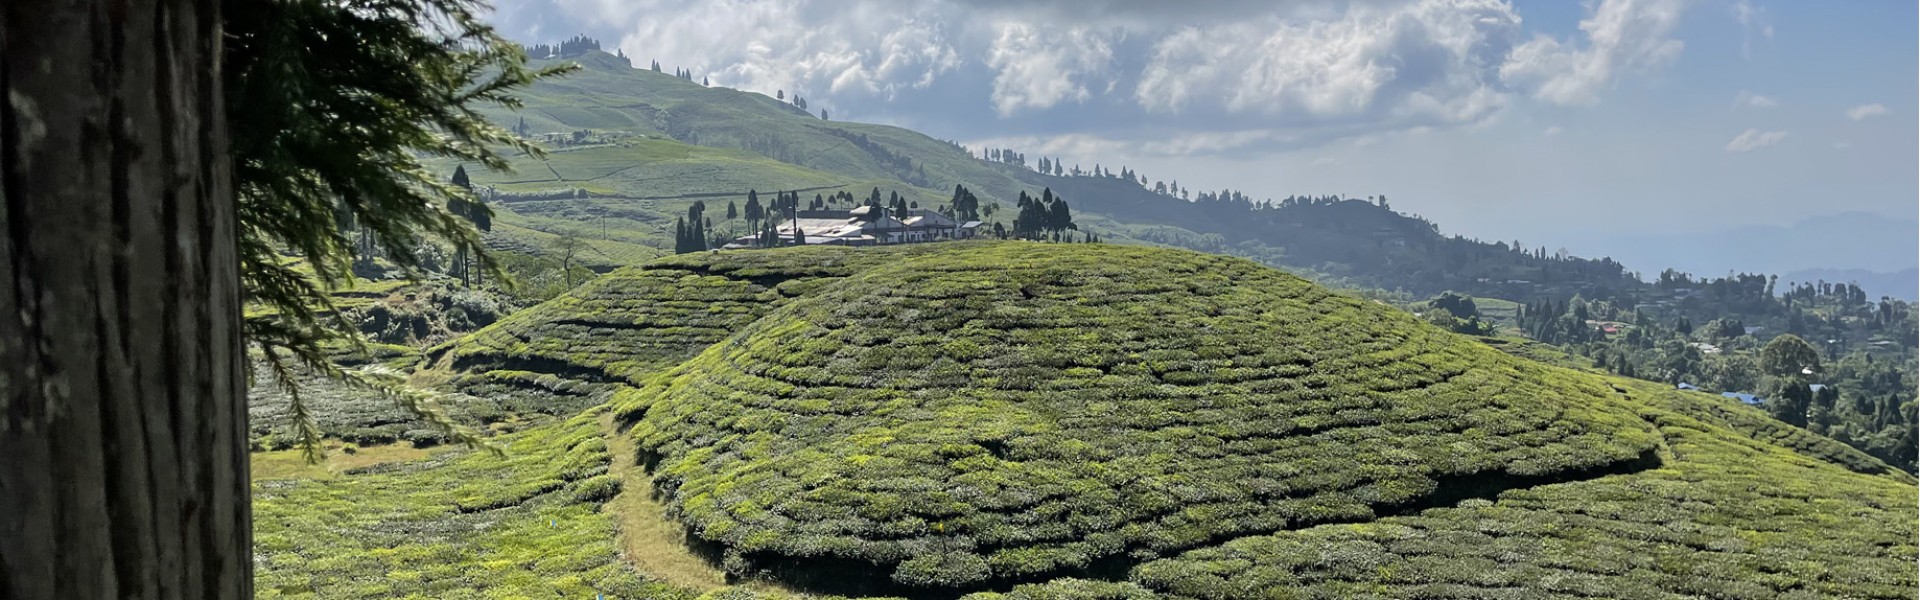 Treasures of the Kathmandu Valley and tea route in Ilam